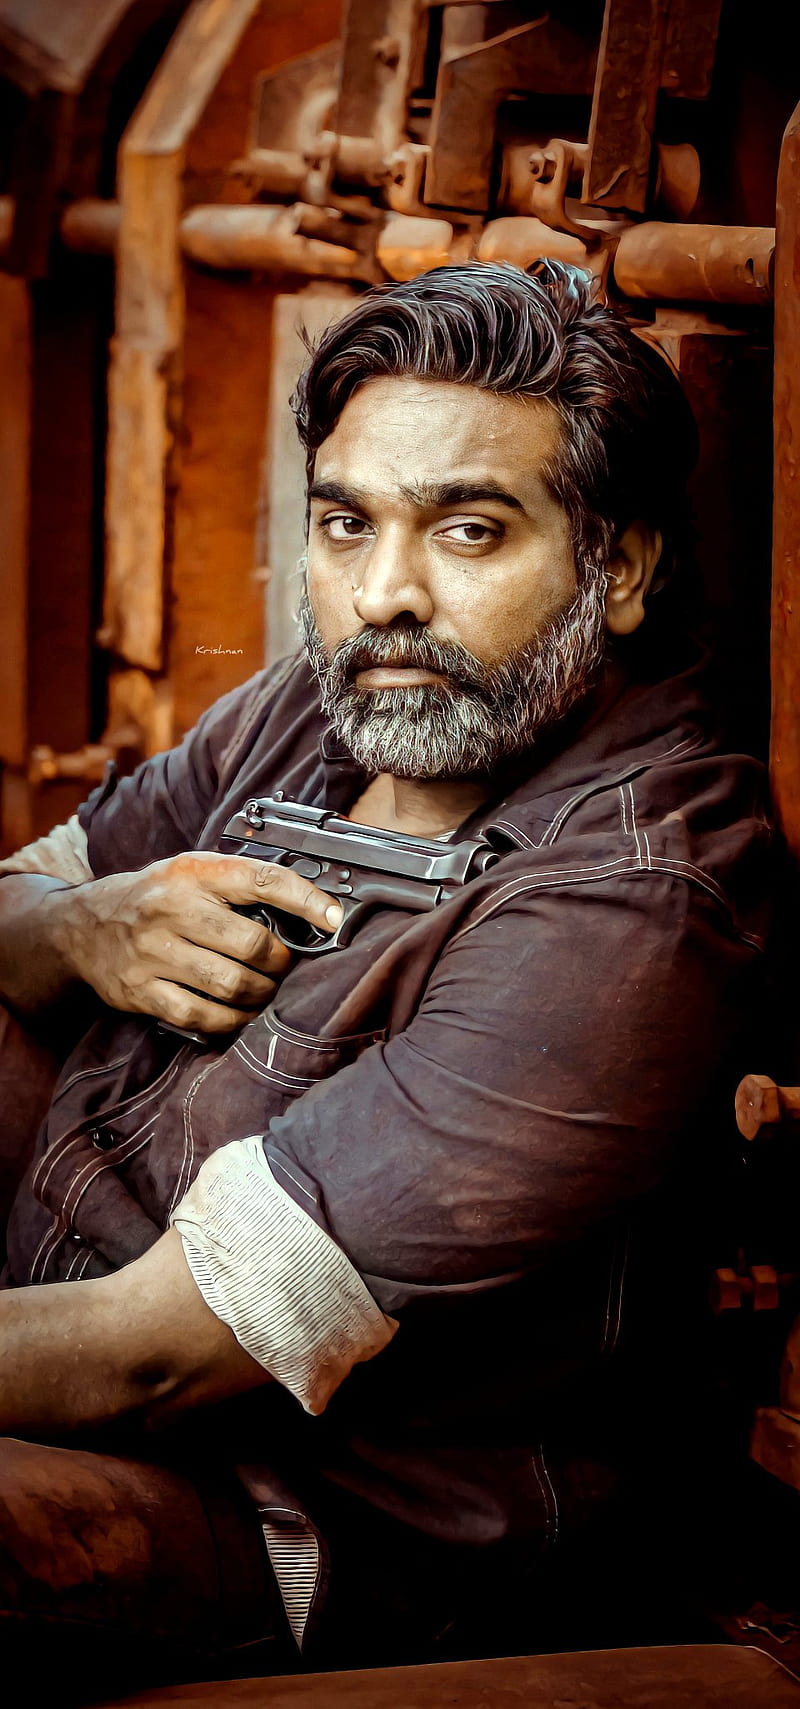 Top 999+ Stunning Vijay Sethupathi HD Images – Complete Collection in Full 4K Resolution